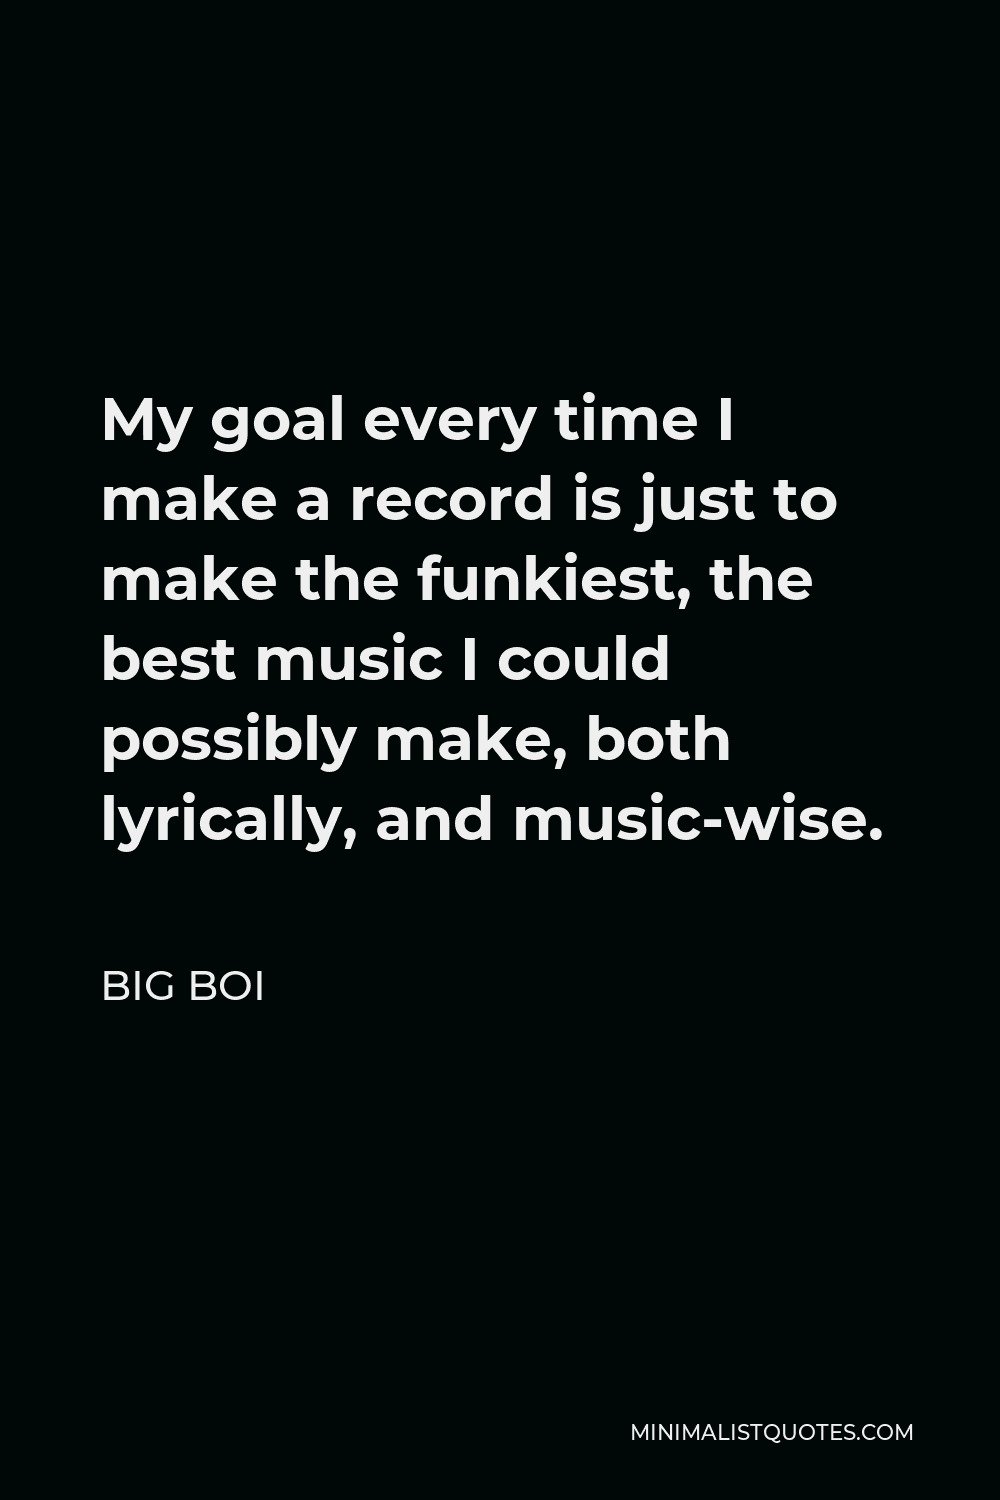 Big Boi Quote - My goal every time I make a record is just to make the funkiest, the best music I could possibly make, both lyrically, and music-wise.